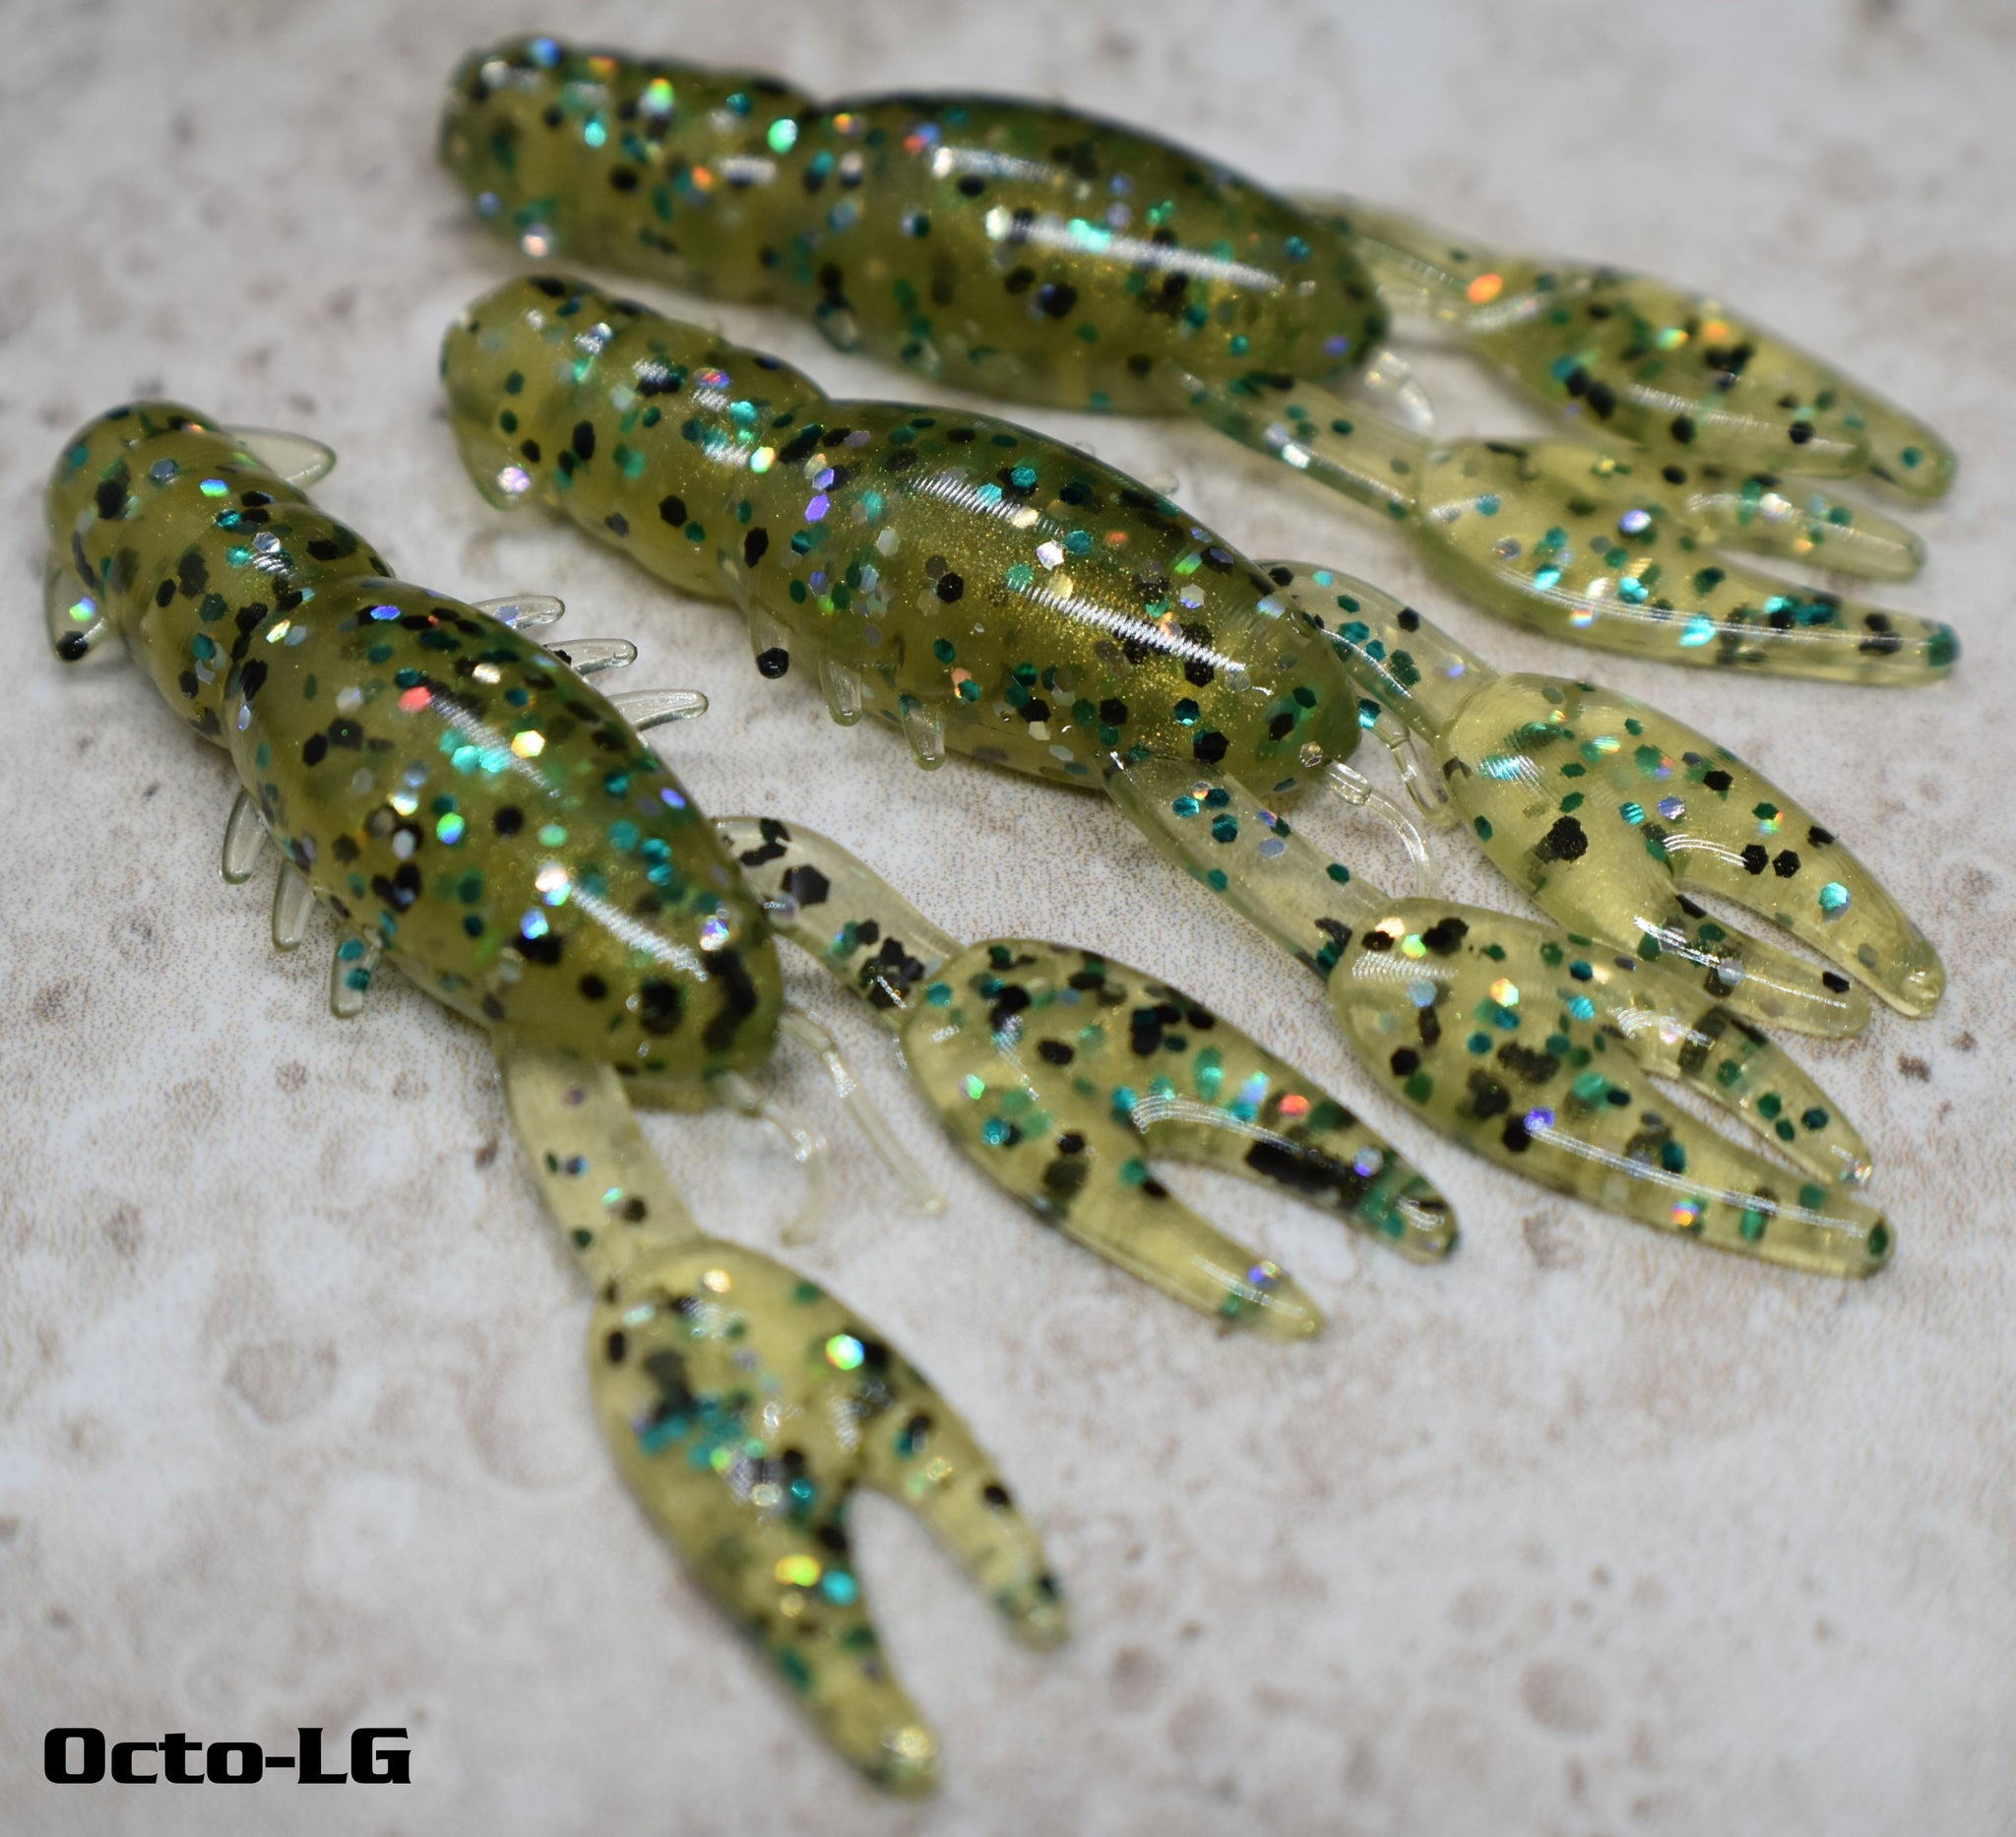 Ned Craw – On the Spot Baits